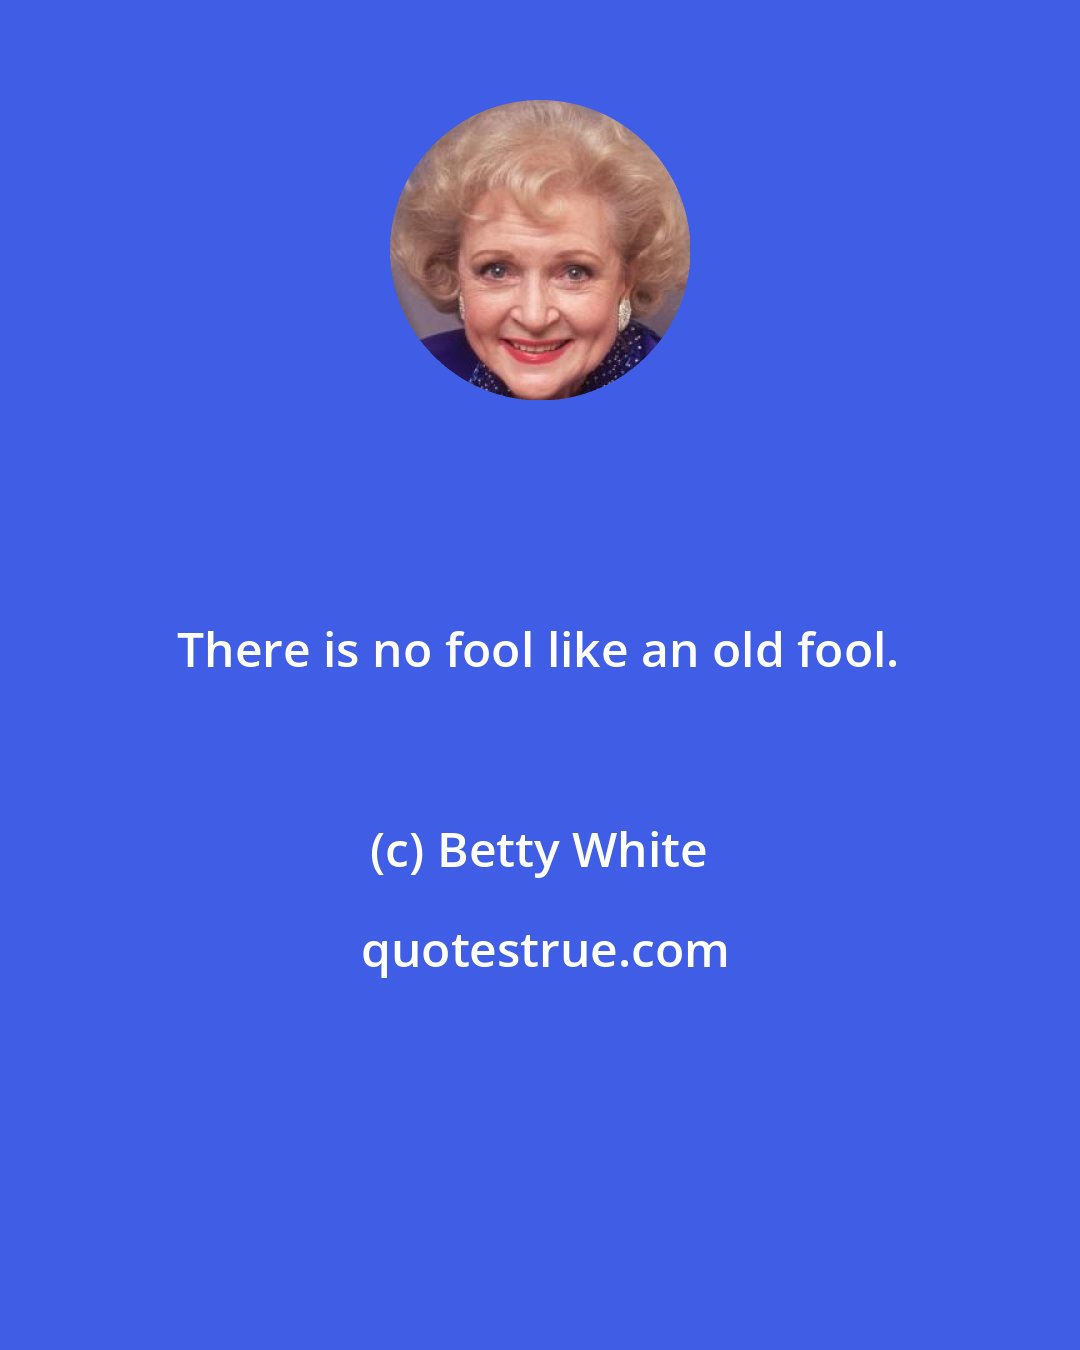 Betty White: There is no fool like an old fool.